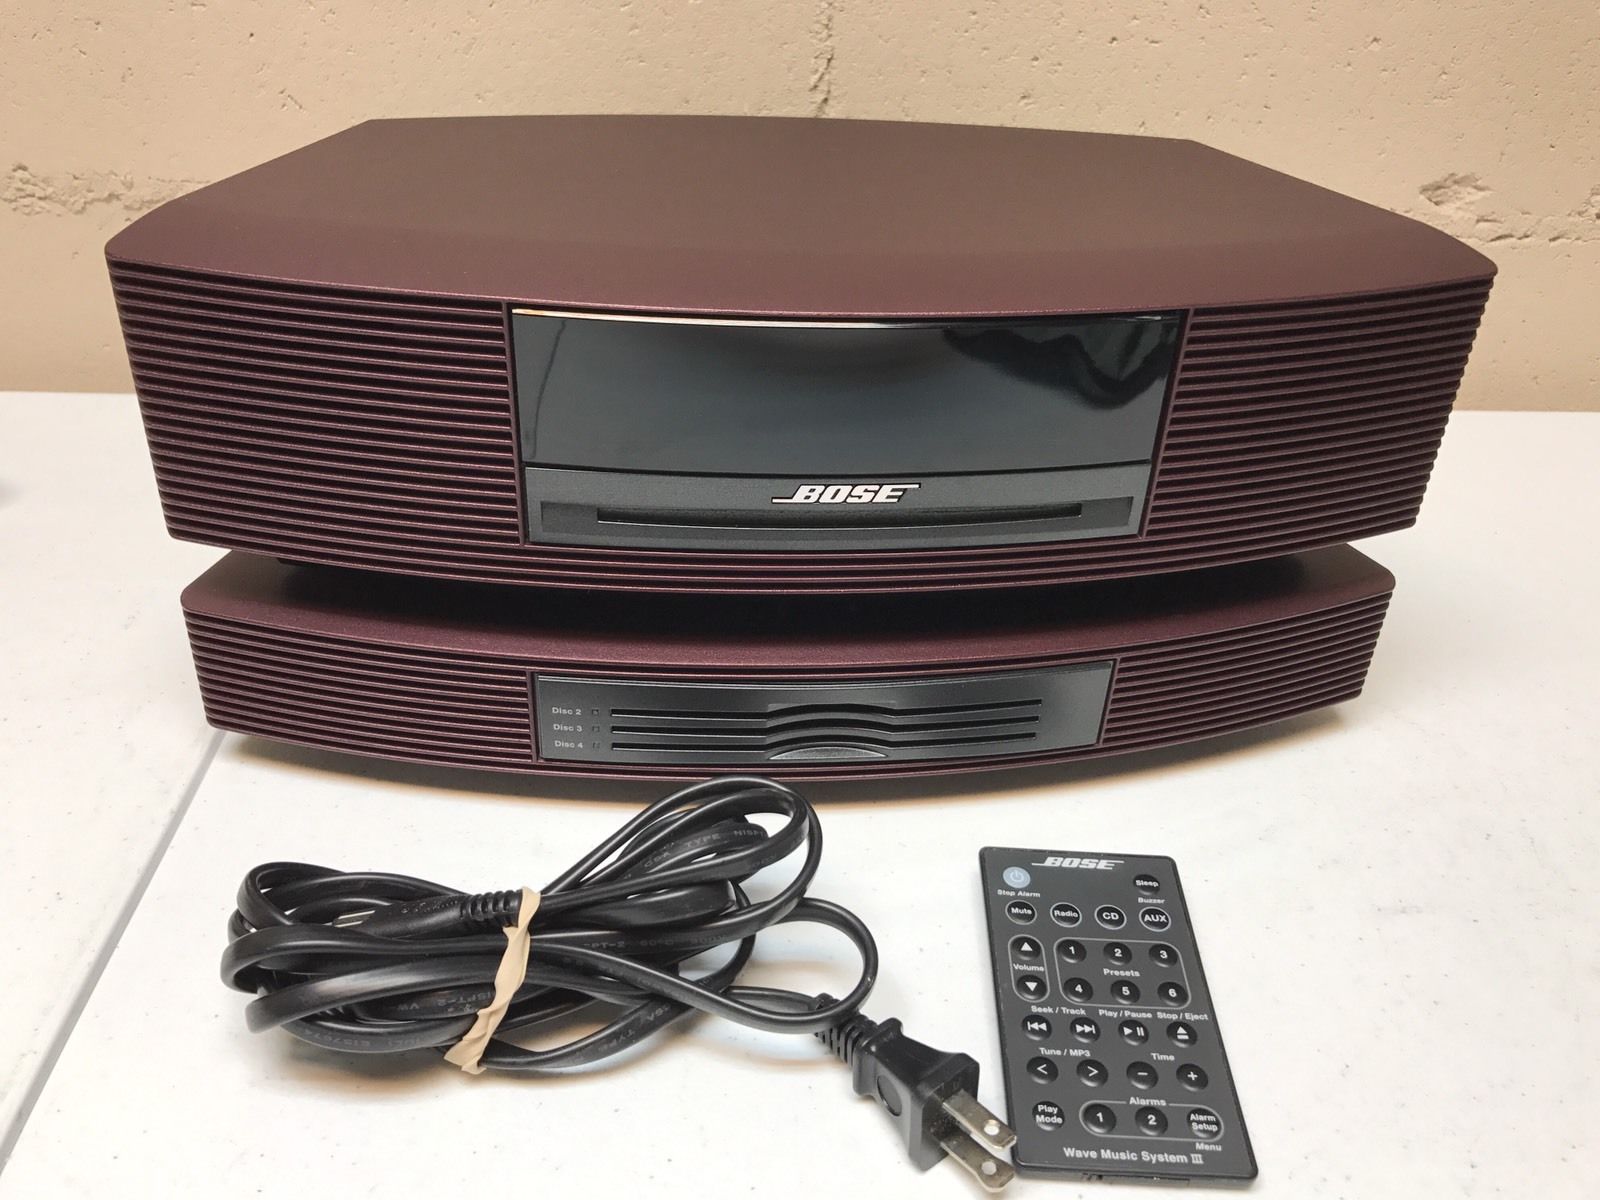 Bose system. Bose Wave SOUNDTOUCH Music System. Bose Wave Music System 3. Bose Wave Prof\Ducts. Toshiba Music System.